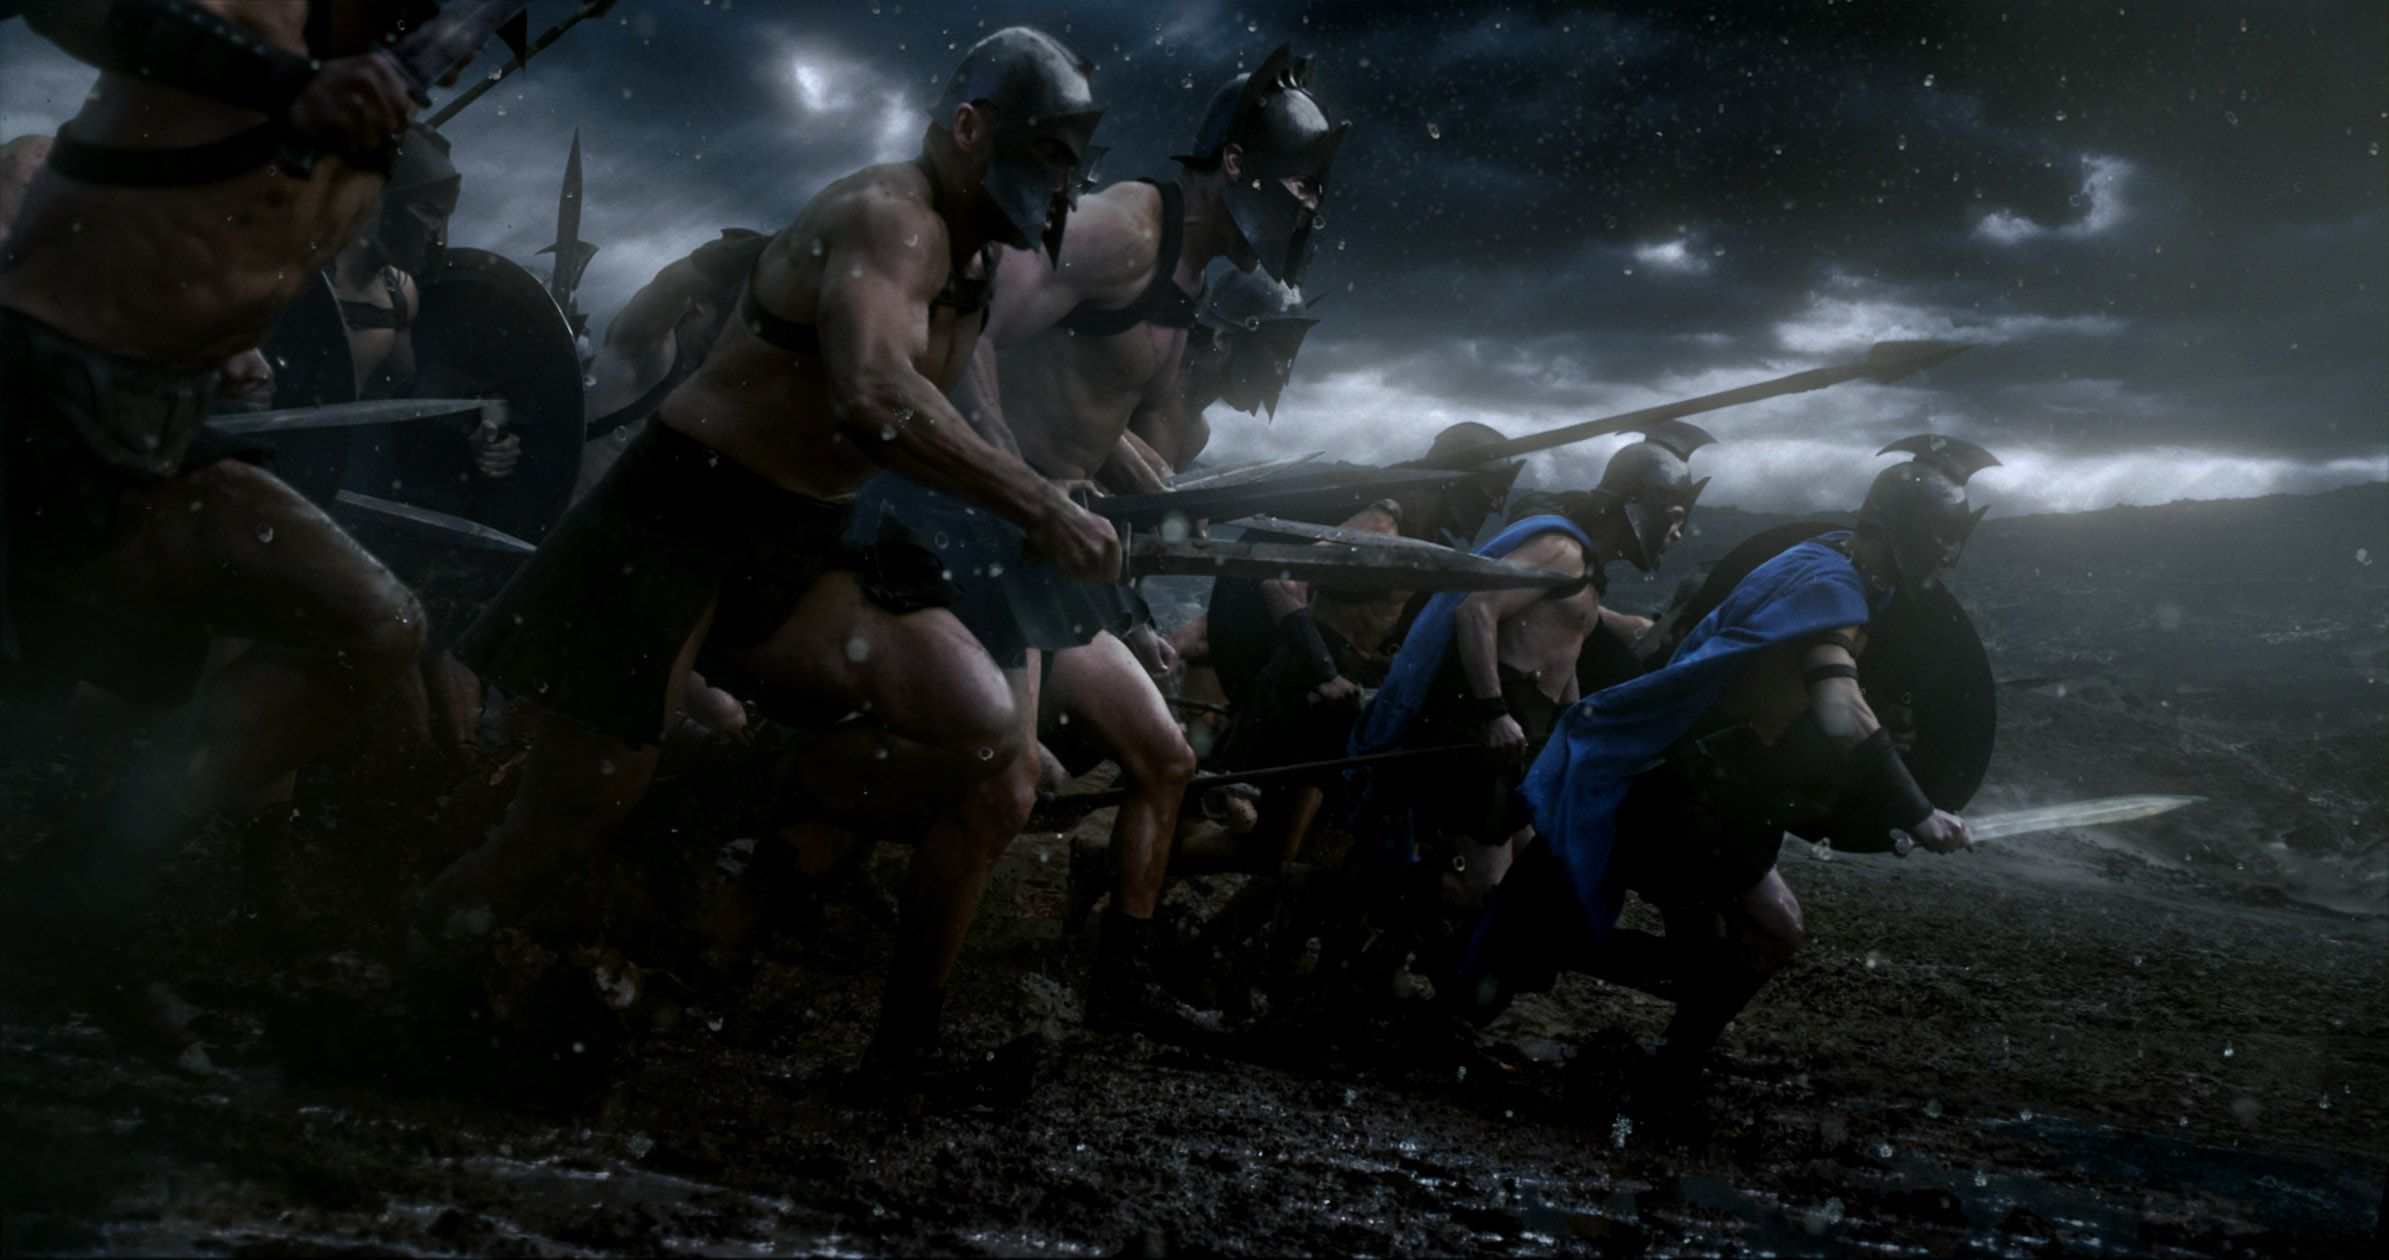 A scene from 300: Rise of an Empire.